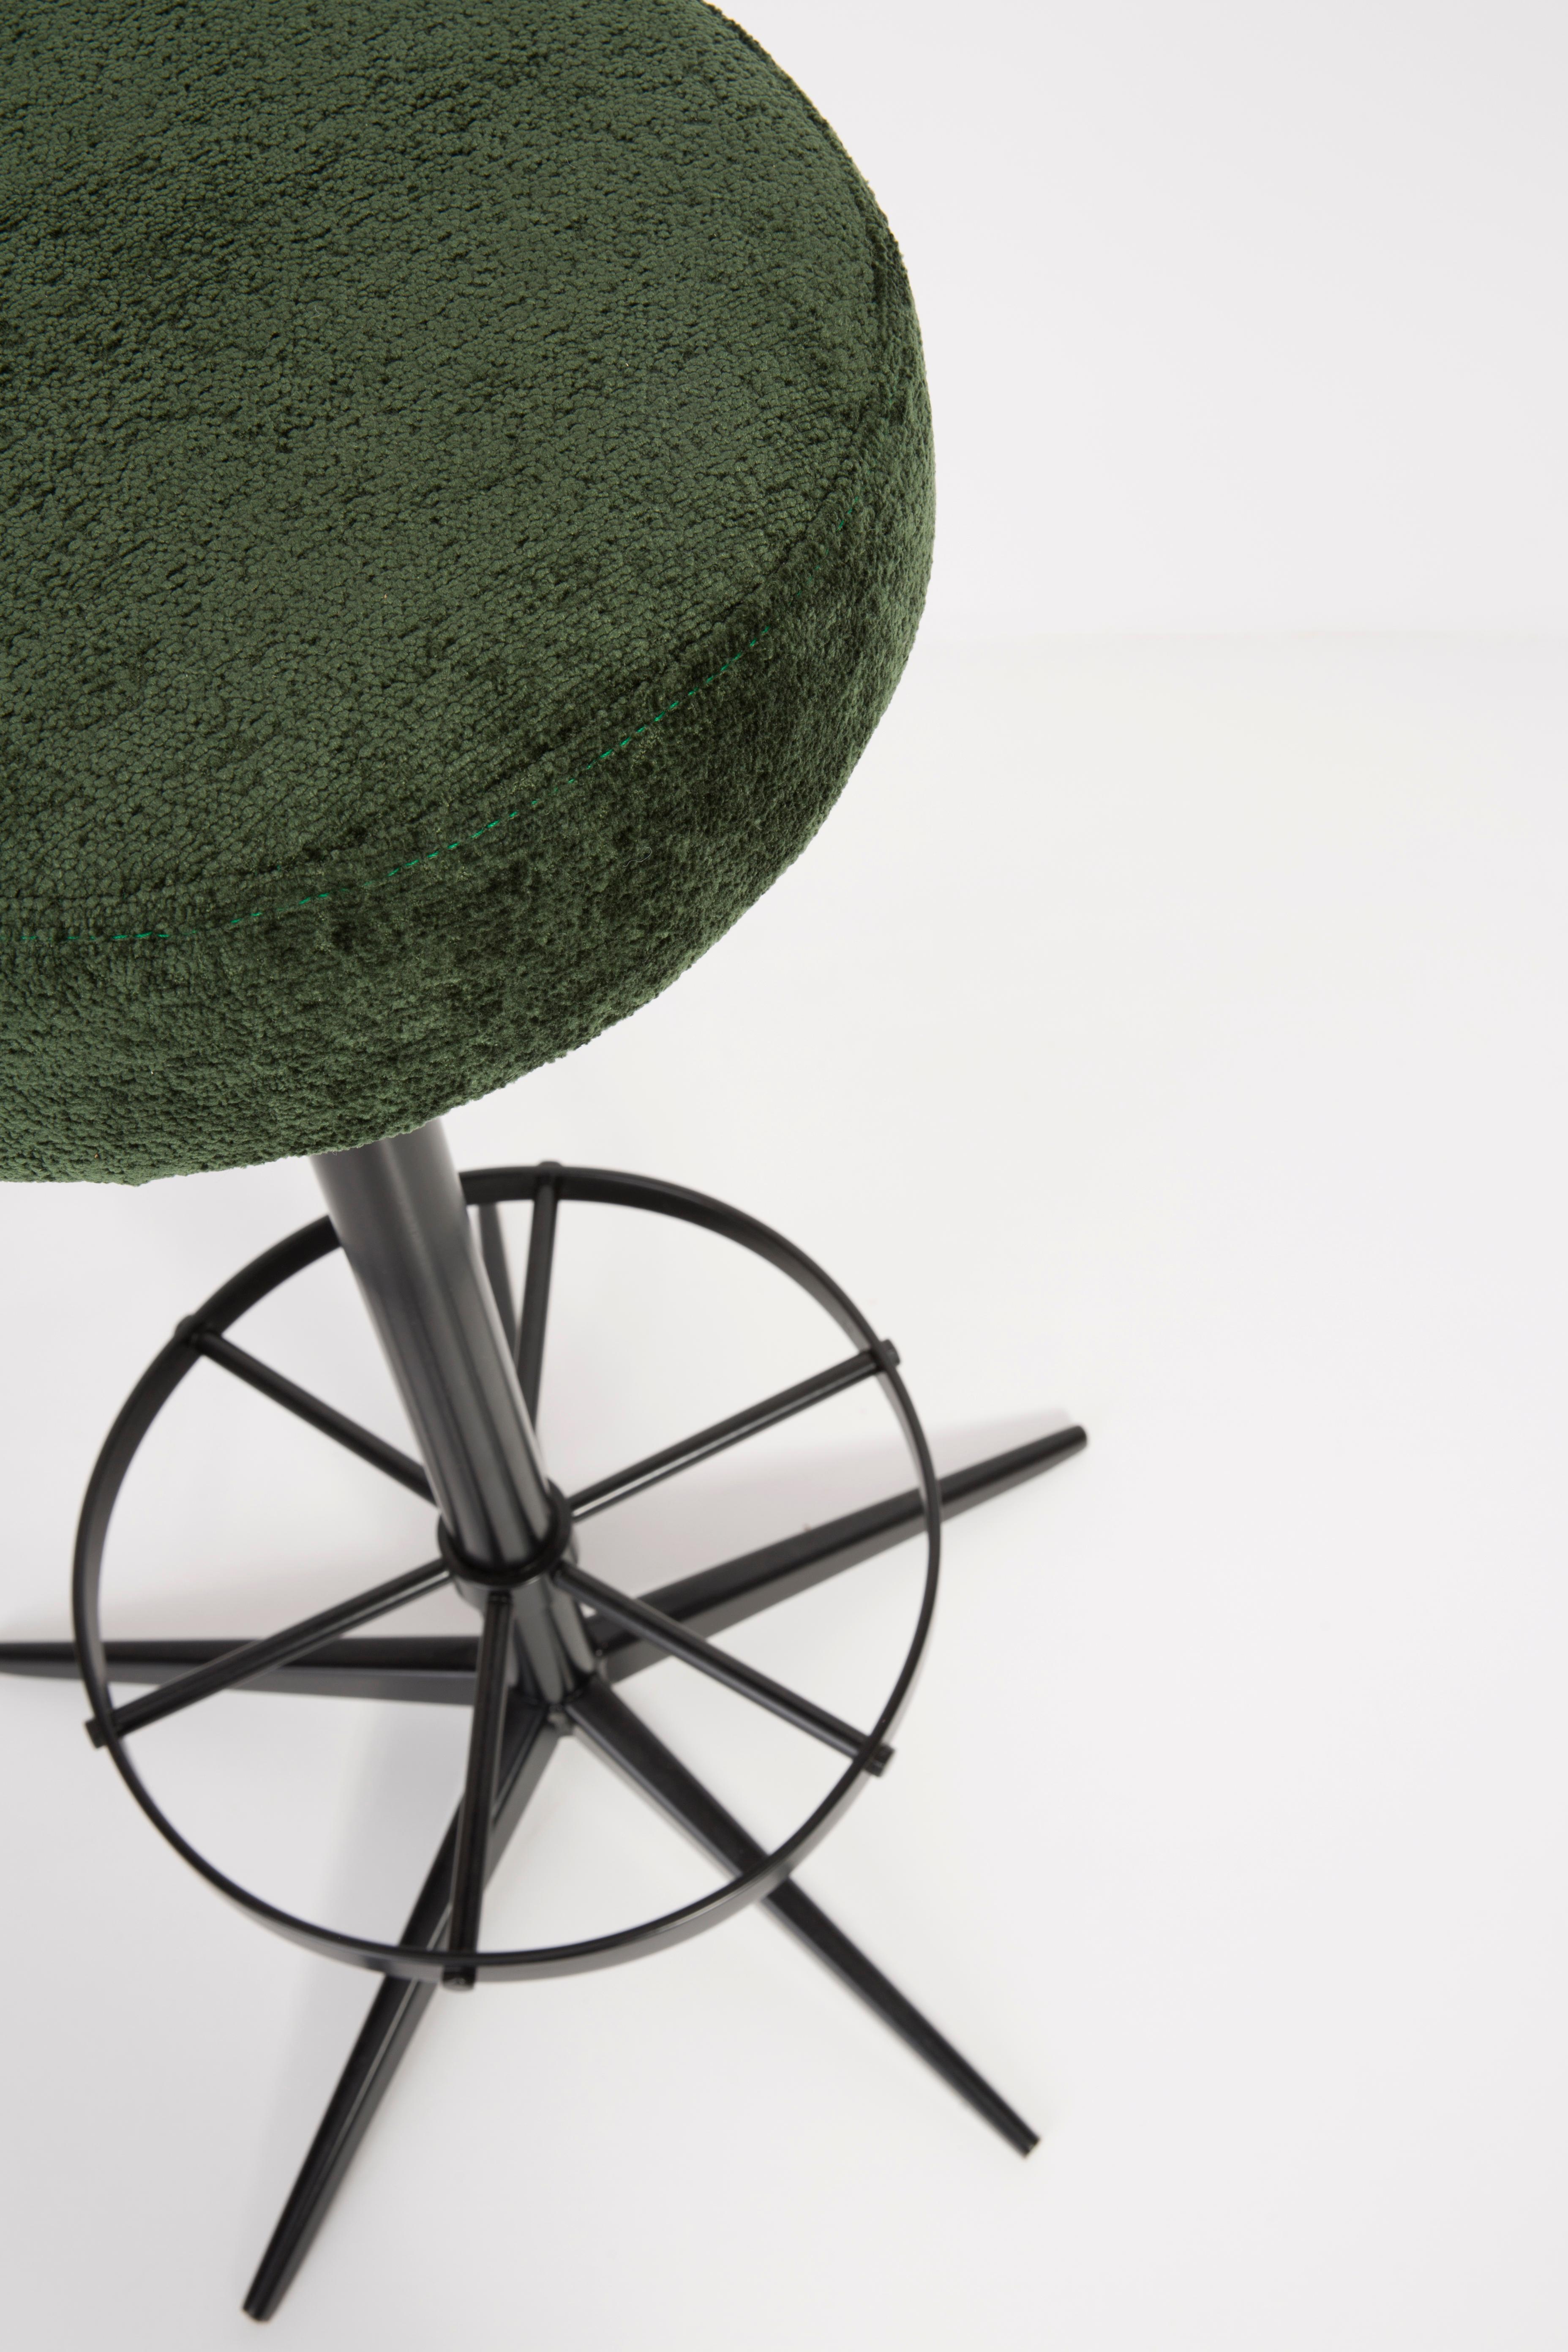 Hand-Crafted Set of Four Mid-Century Modern Dark Green Bar Stools, 1960s For Sale